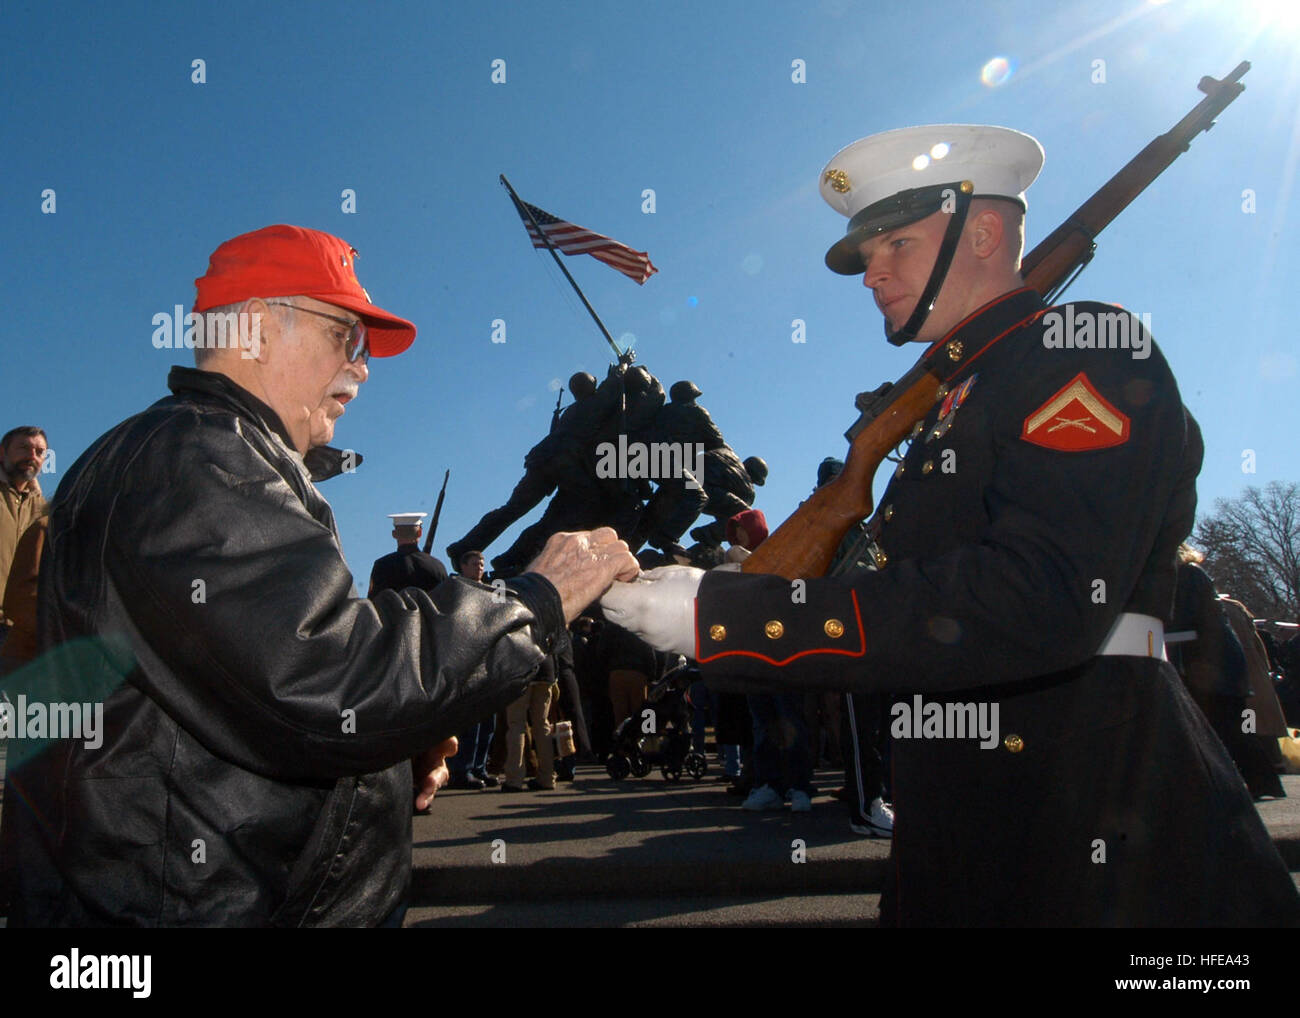 050219-N-8502J-009 Arlington, Va. (Feb. 19, 2005) - Lance Cpl. Nathan Hockenberry, right, presents Battle of Iwo Jima survivor George Cattelona, a shell casing following a remembrance ceremony held at the U.S. Marine Corps Memorial in Arlington, Va. Cattelona was among many Iwo Jima survivors to attend the wreath-laying ceremony, marking 60 years since the start of the Battle of Iwo Jima. U.S. Navy photo by Journalist 1st Class Mike Jones (RELEASED) US Navy 050219-N-8502J-009 Lance Cpl. Nathan Hockenberry, right, presents Battle of Iwo Jima survivor George Cattelona, a shell casing following a Stock Photo